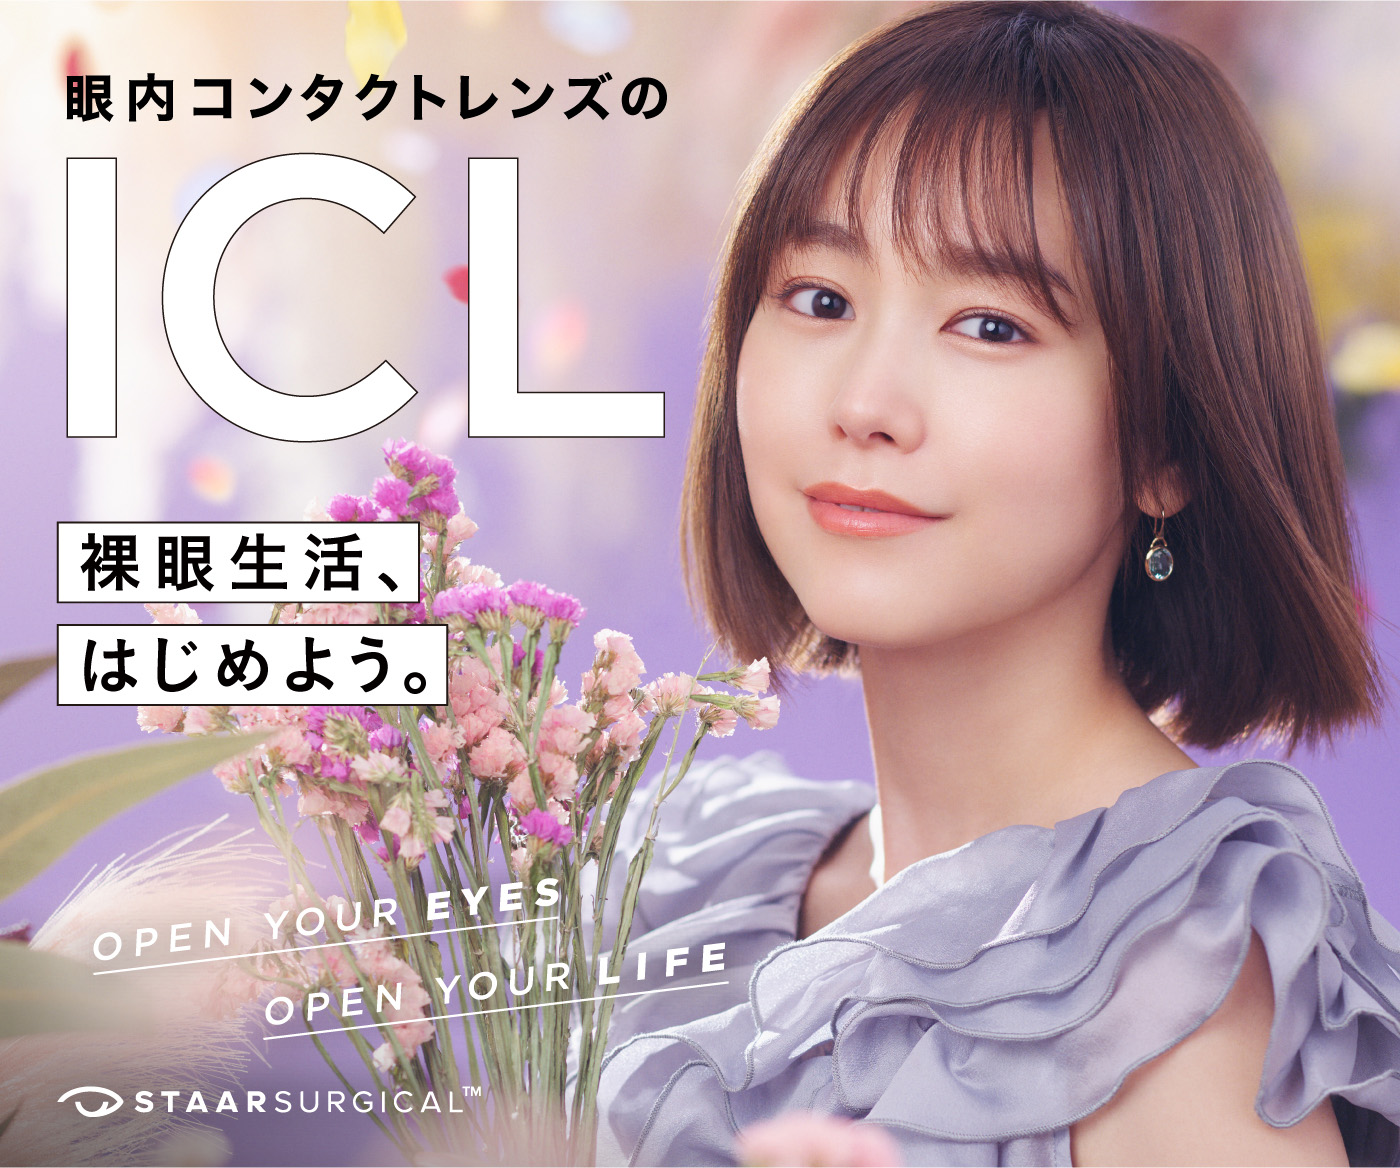 ICL・IPCL